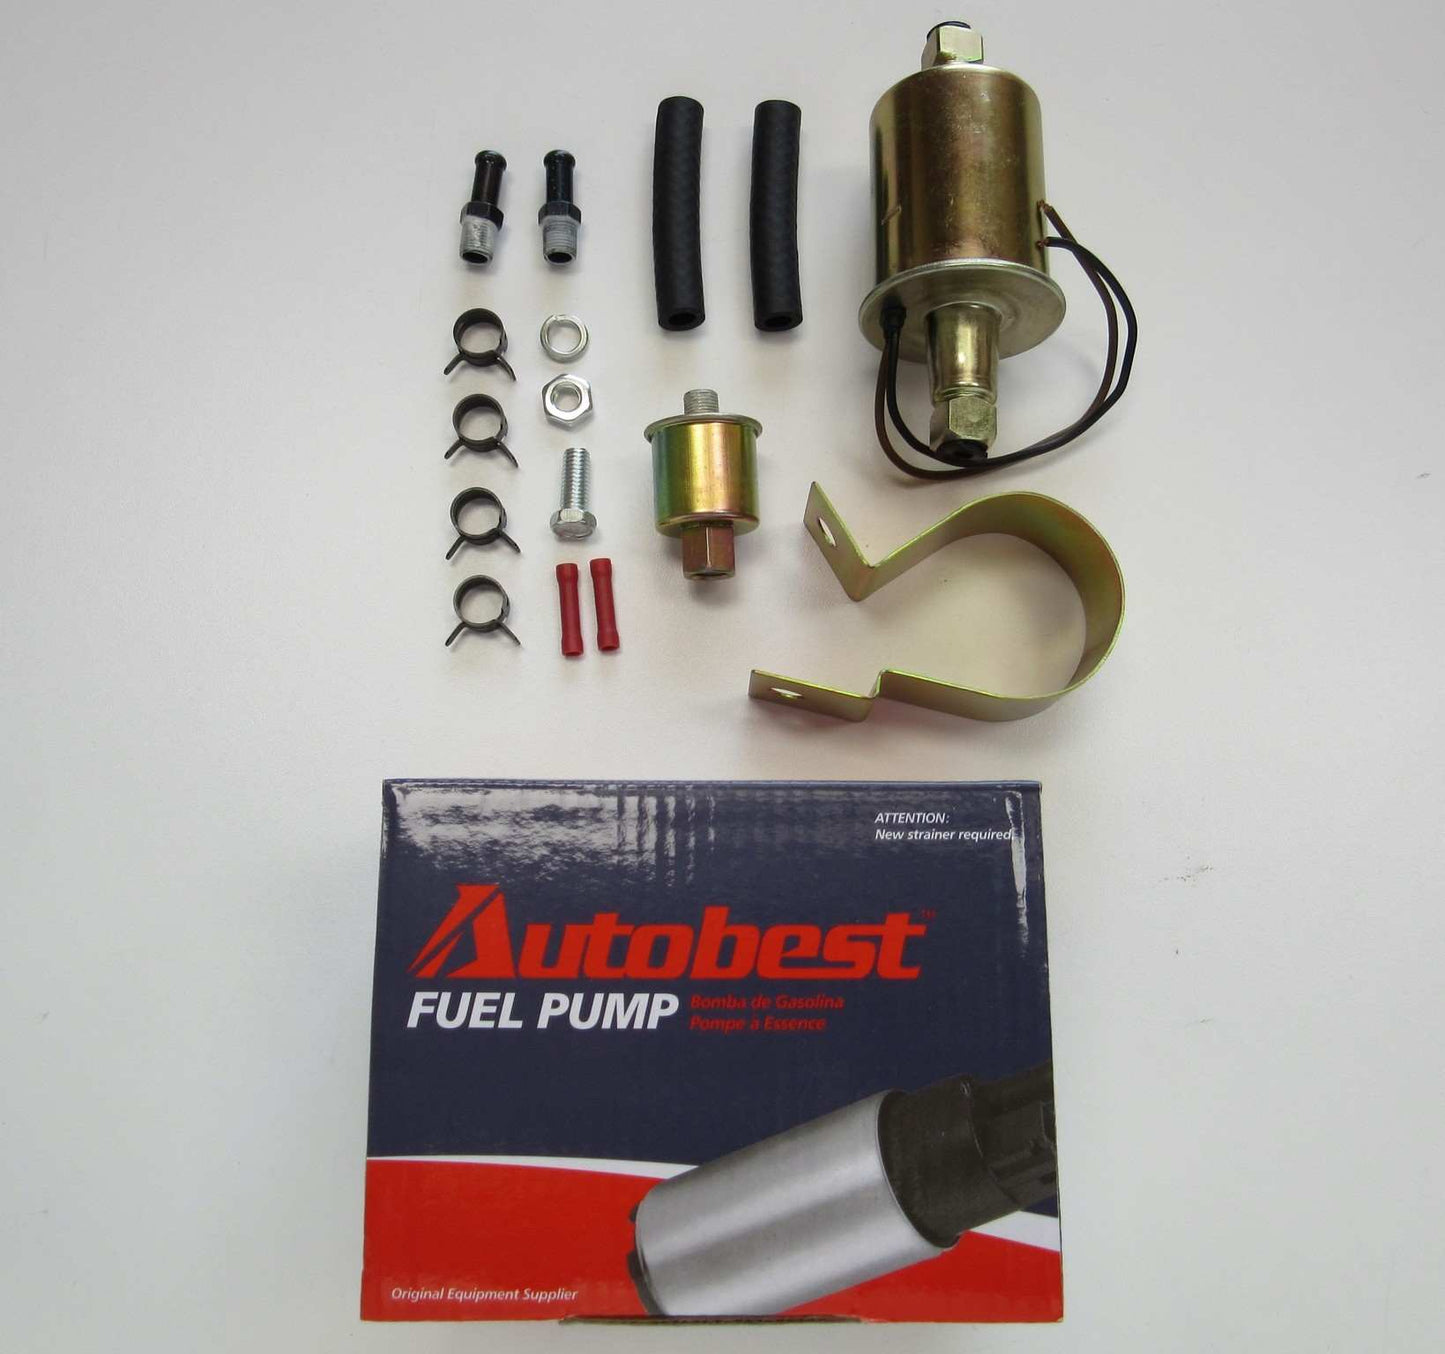 Angle View of Electric Fuel Pump AUTOBEST F4027